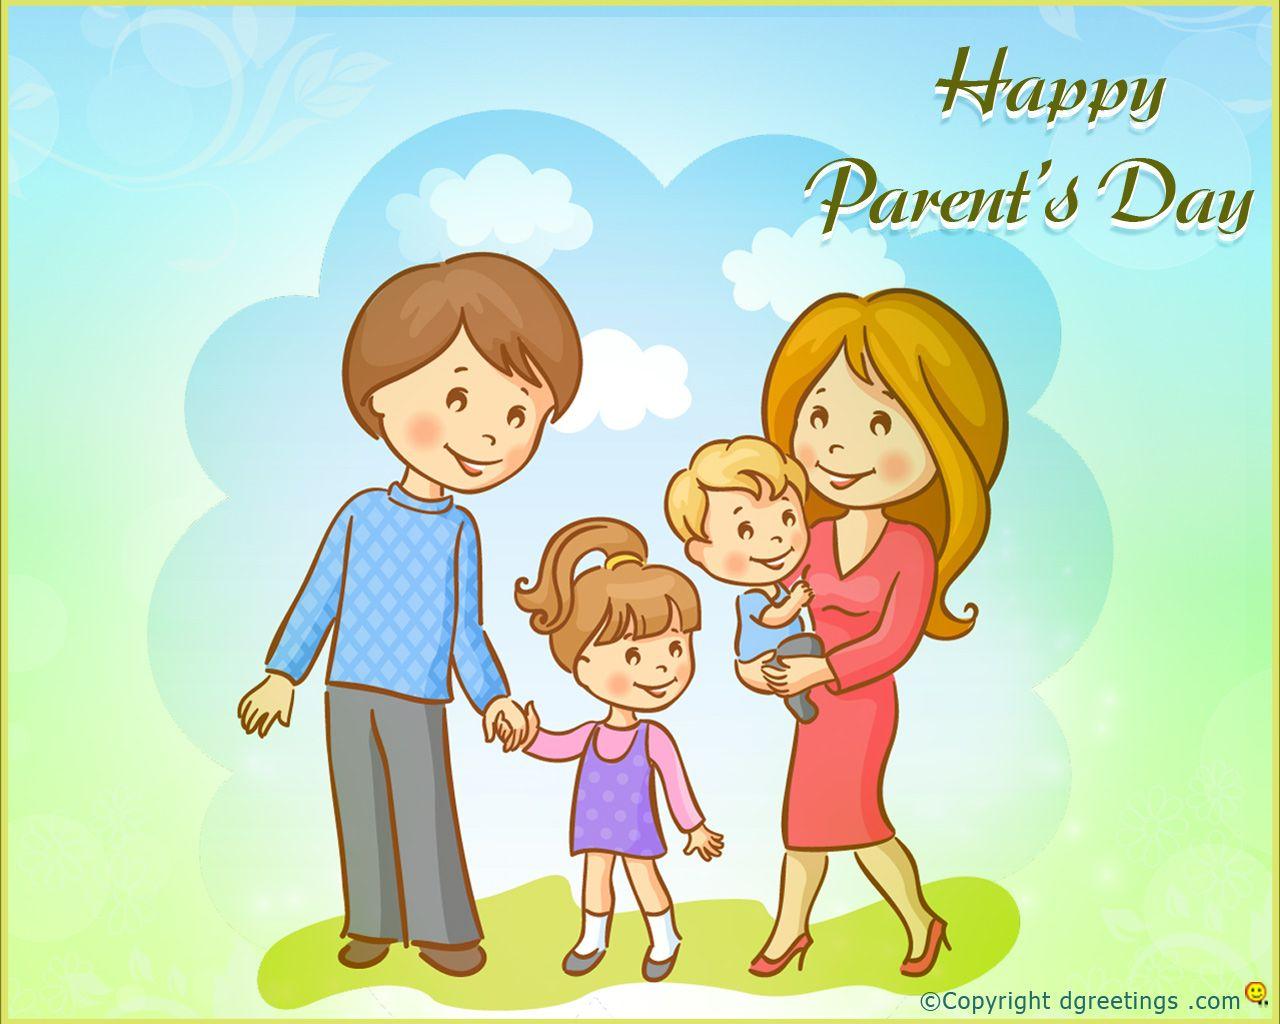 Happy parents day - Greetings Wishes Image